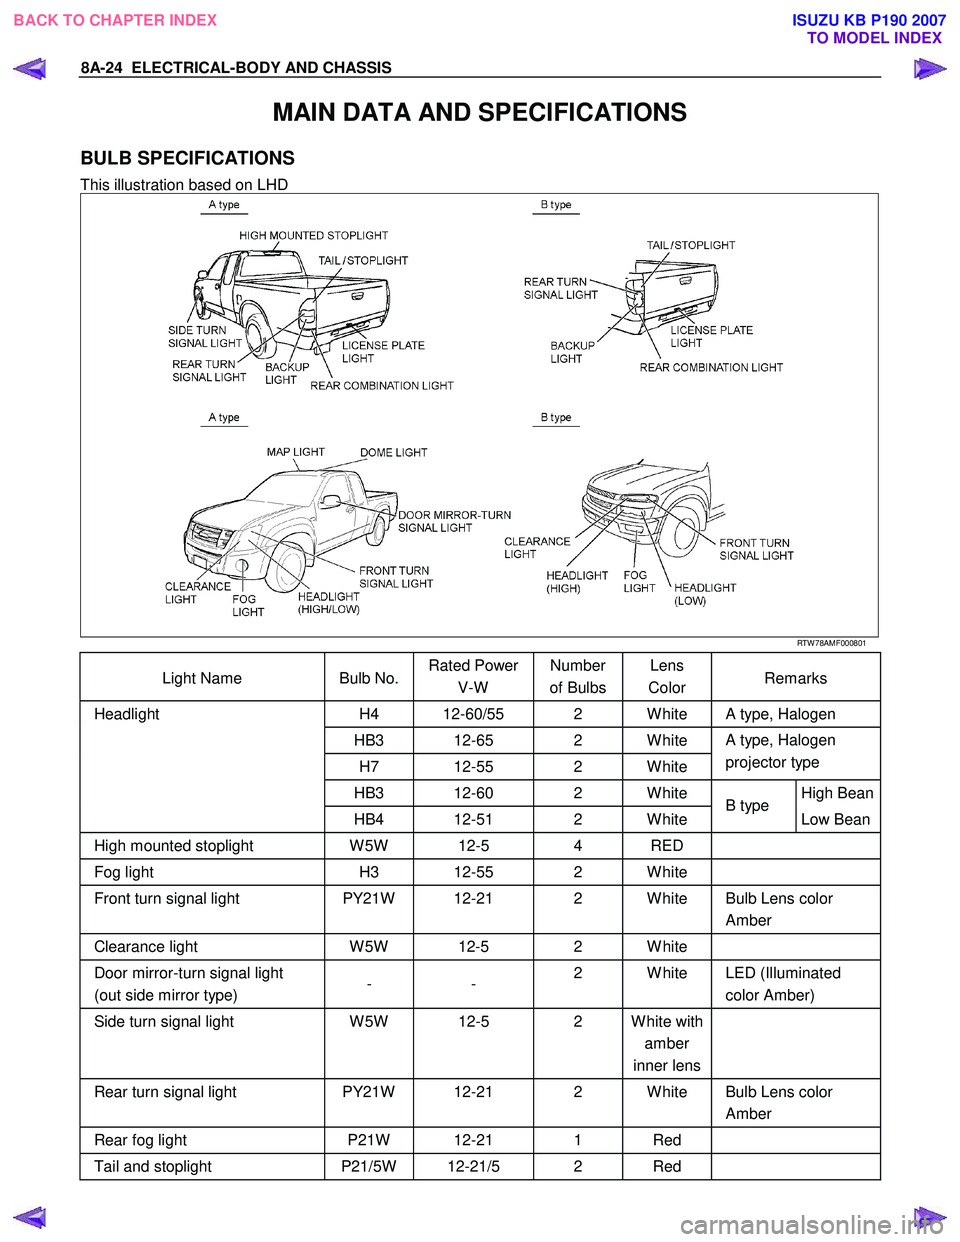 ISUZU KB P190 2007  Workshop User Guide 8A-24  ELECTRICAL-BODY AND CHASSIS 
MAIN DATA AND SPECIFICATIONS 
BULB SPECIFICATIONS 
This illustration based on LHD  
  
   RTW 78AMF000801 
Light Name   Bulb No. Rated Power 
V-W   Number 
of Bulbs